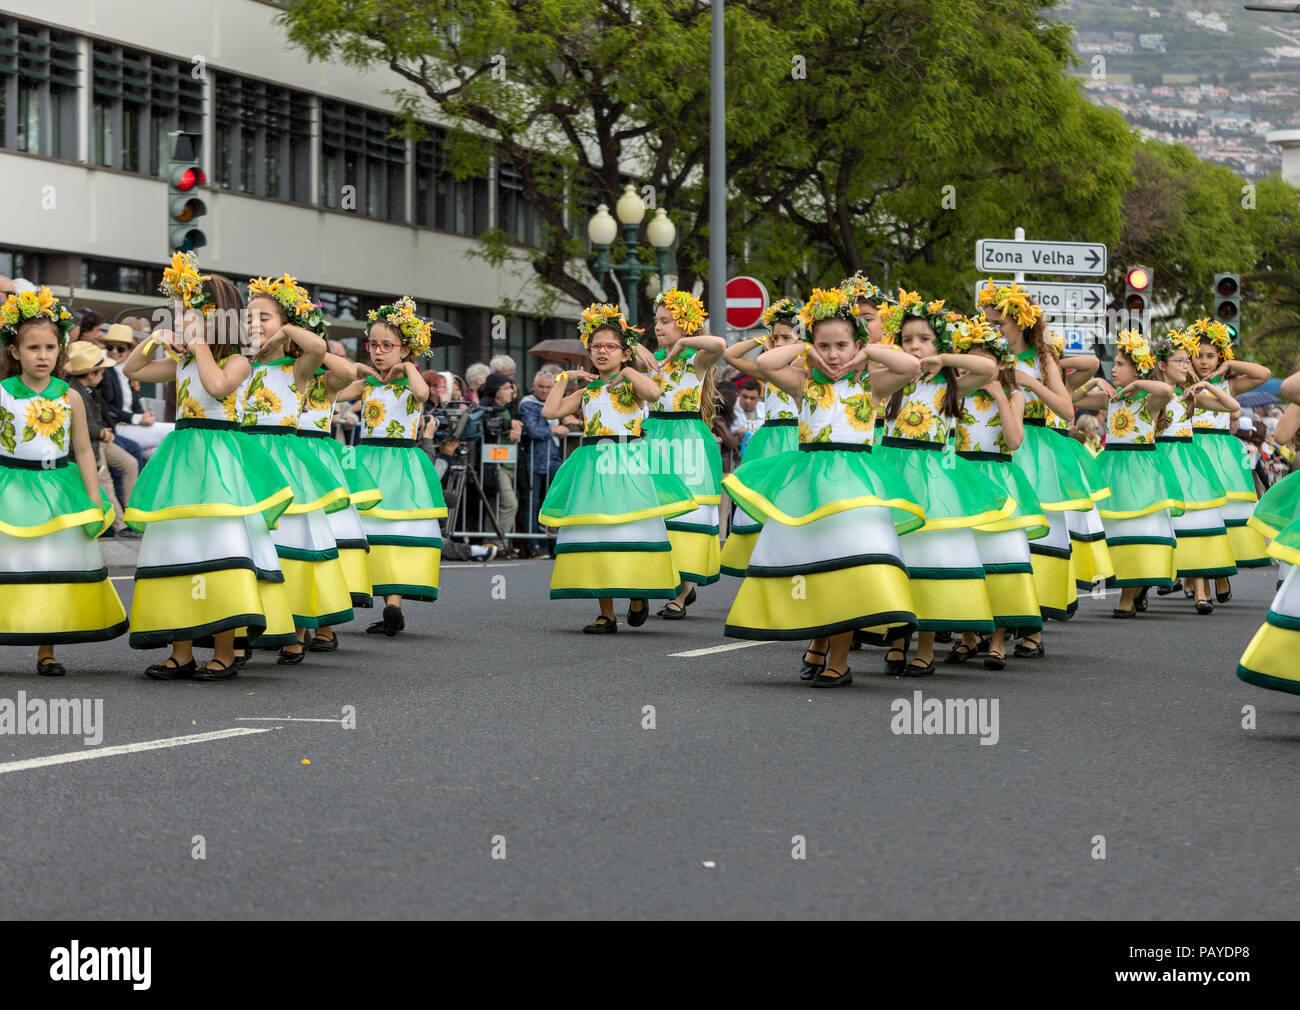 Funchal; Madeira; Portugal - April 22; 2018: A group of girls in colorful dresses are dancing at Madeira Flower Festival Parade in Funchal on the Isla Stock Photo